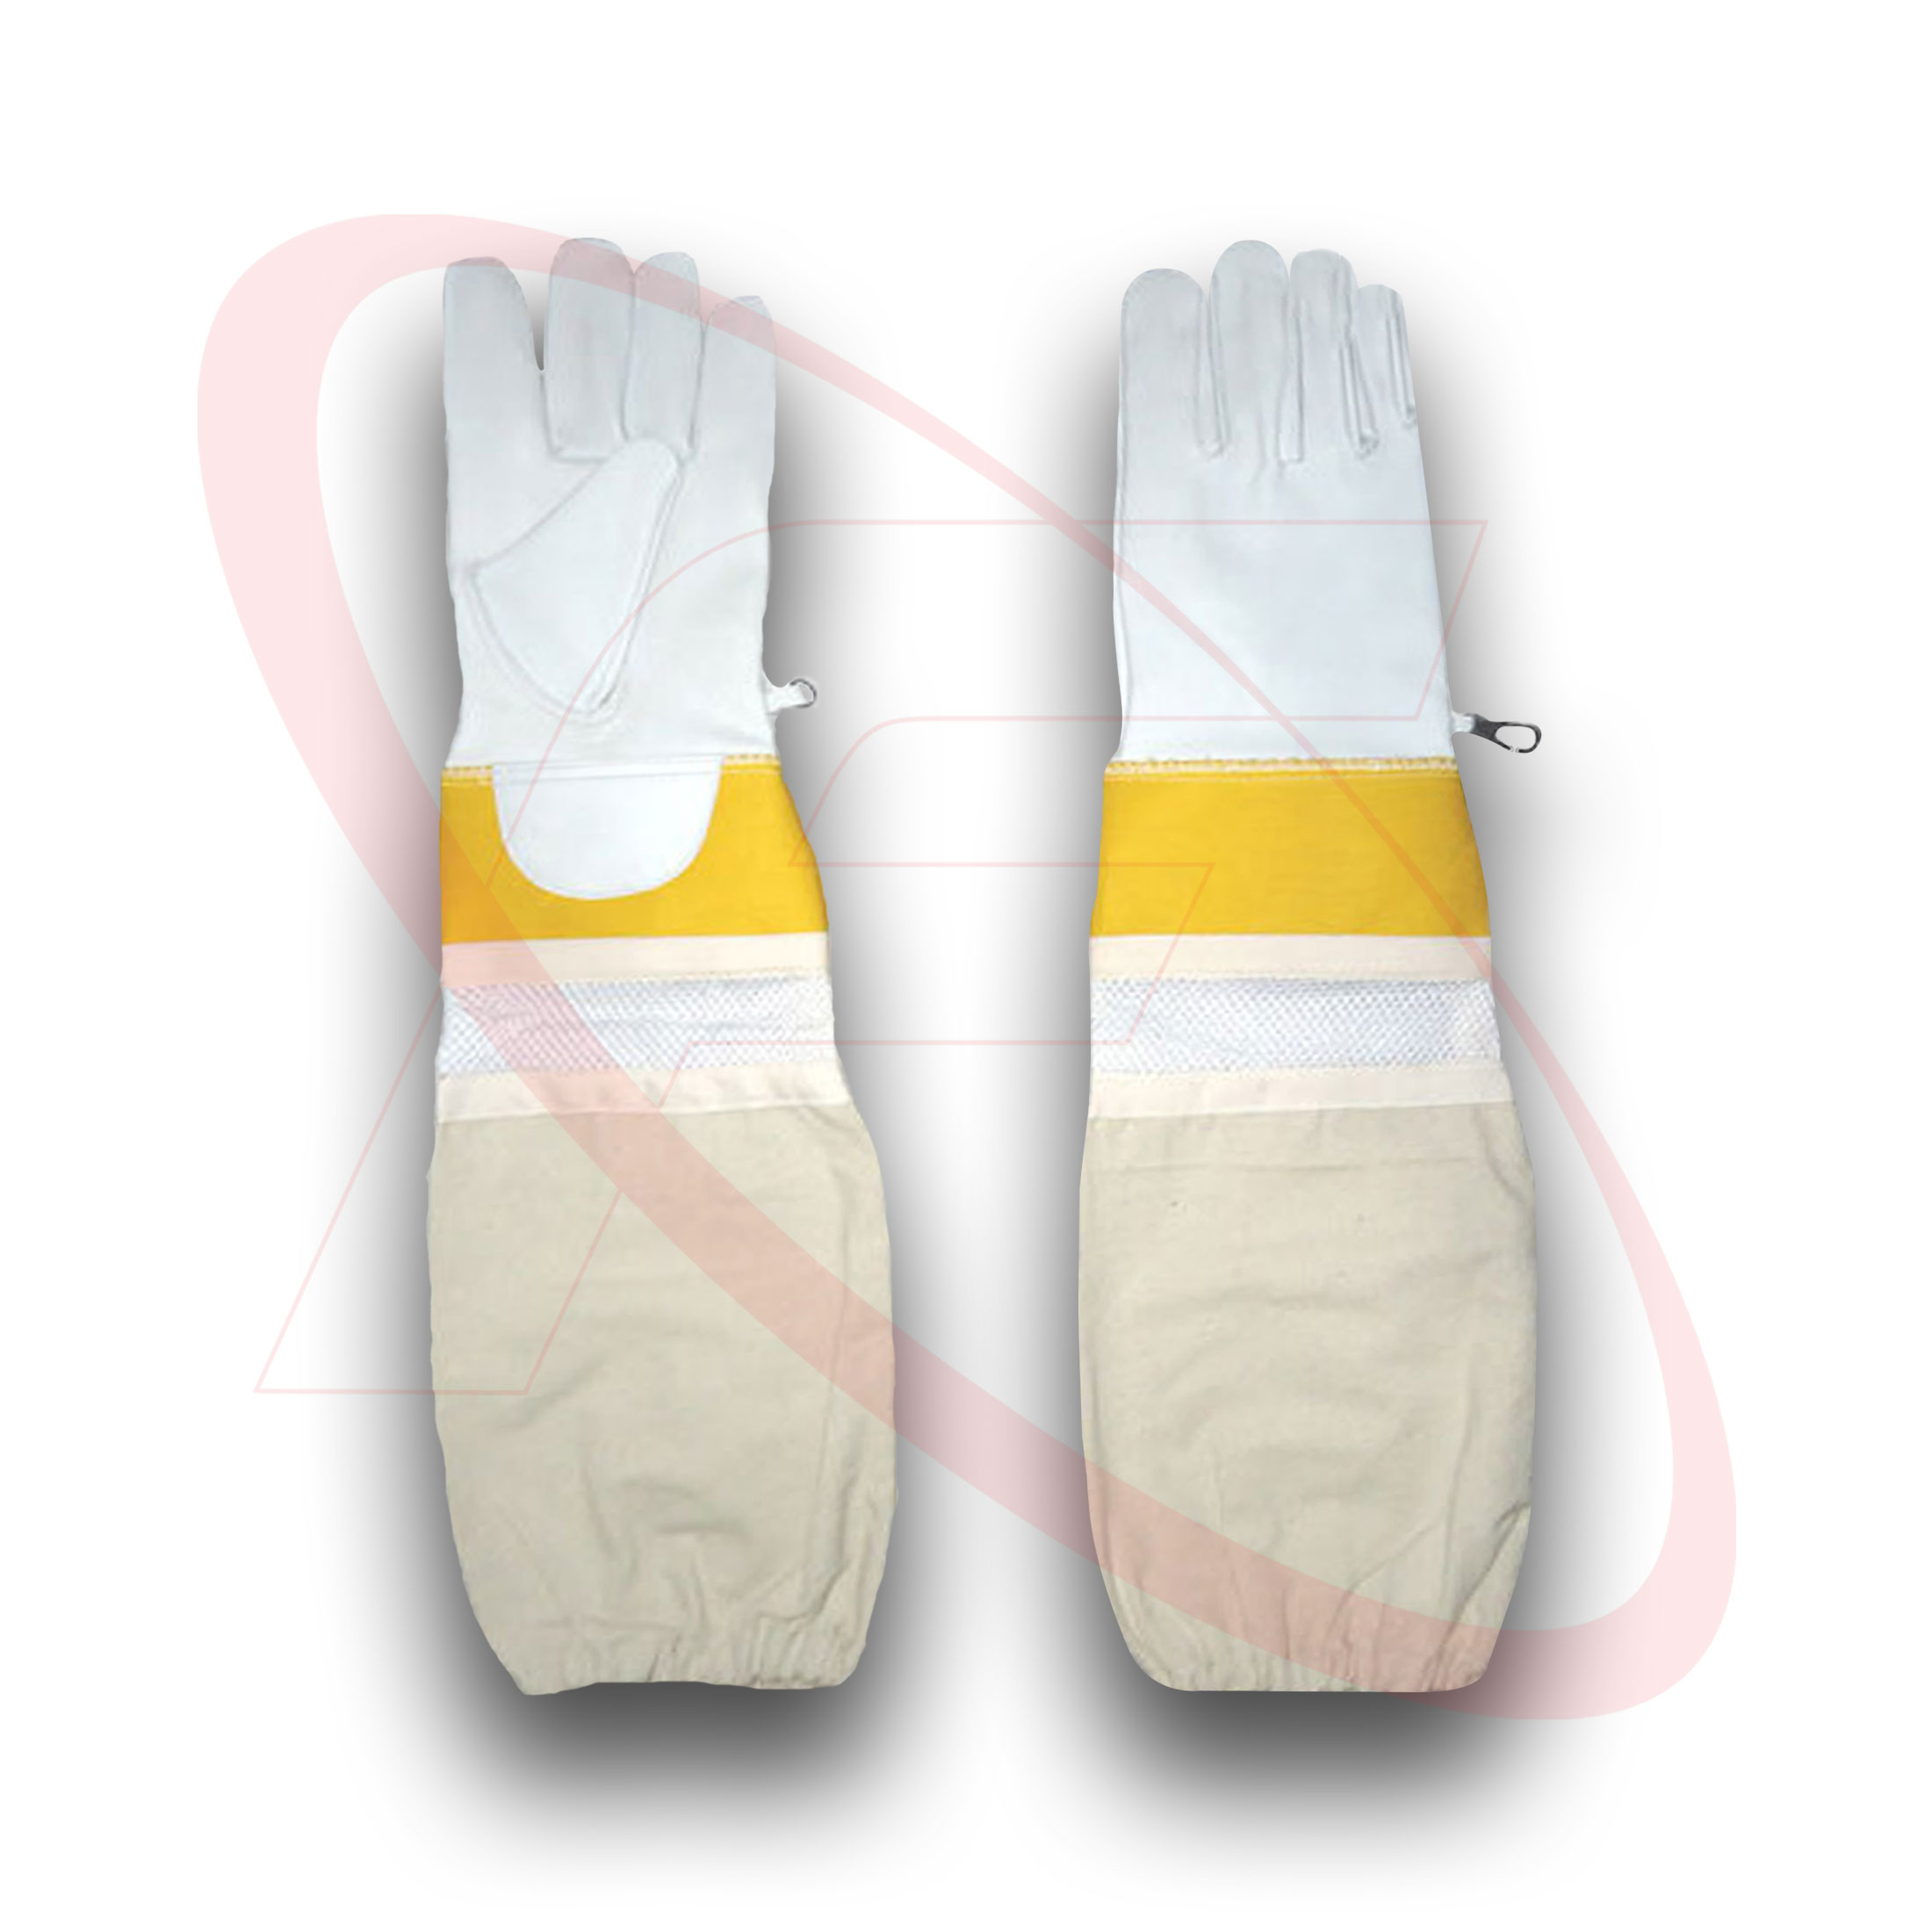 Top Quality Beekeeping Safety Gloves in Cowhide Leather Bee-Keepers Gloves For Hand Protection Yellow Rubberized Cuff